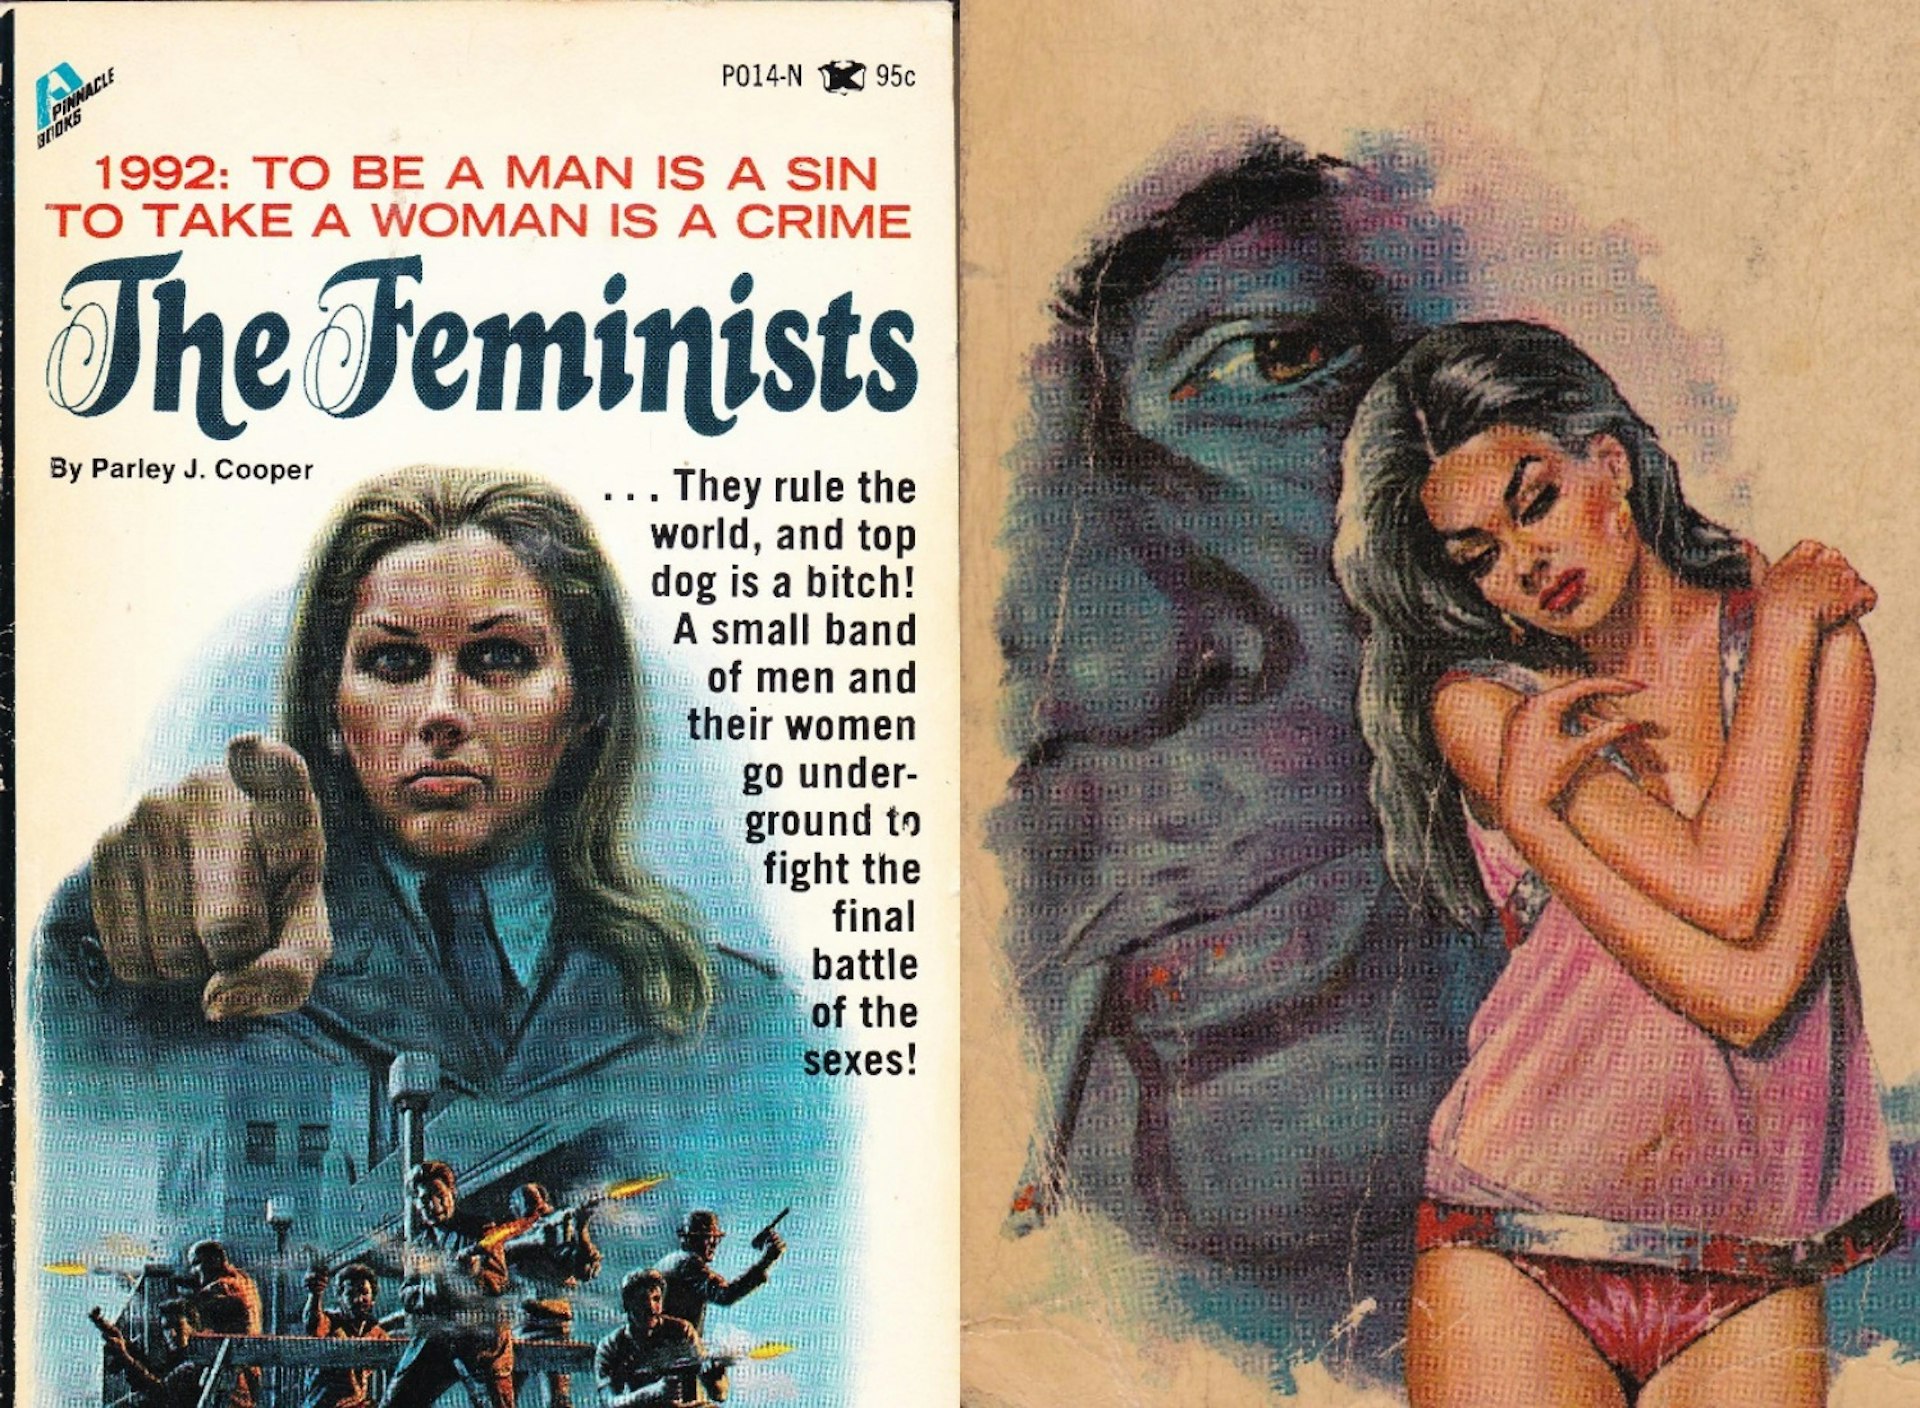 The countercultural power of American pulp fiction